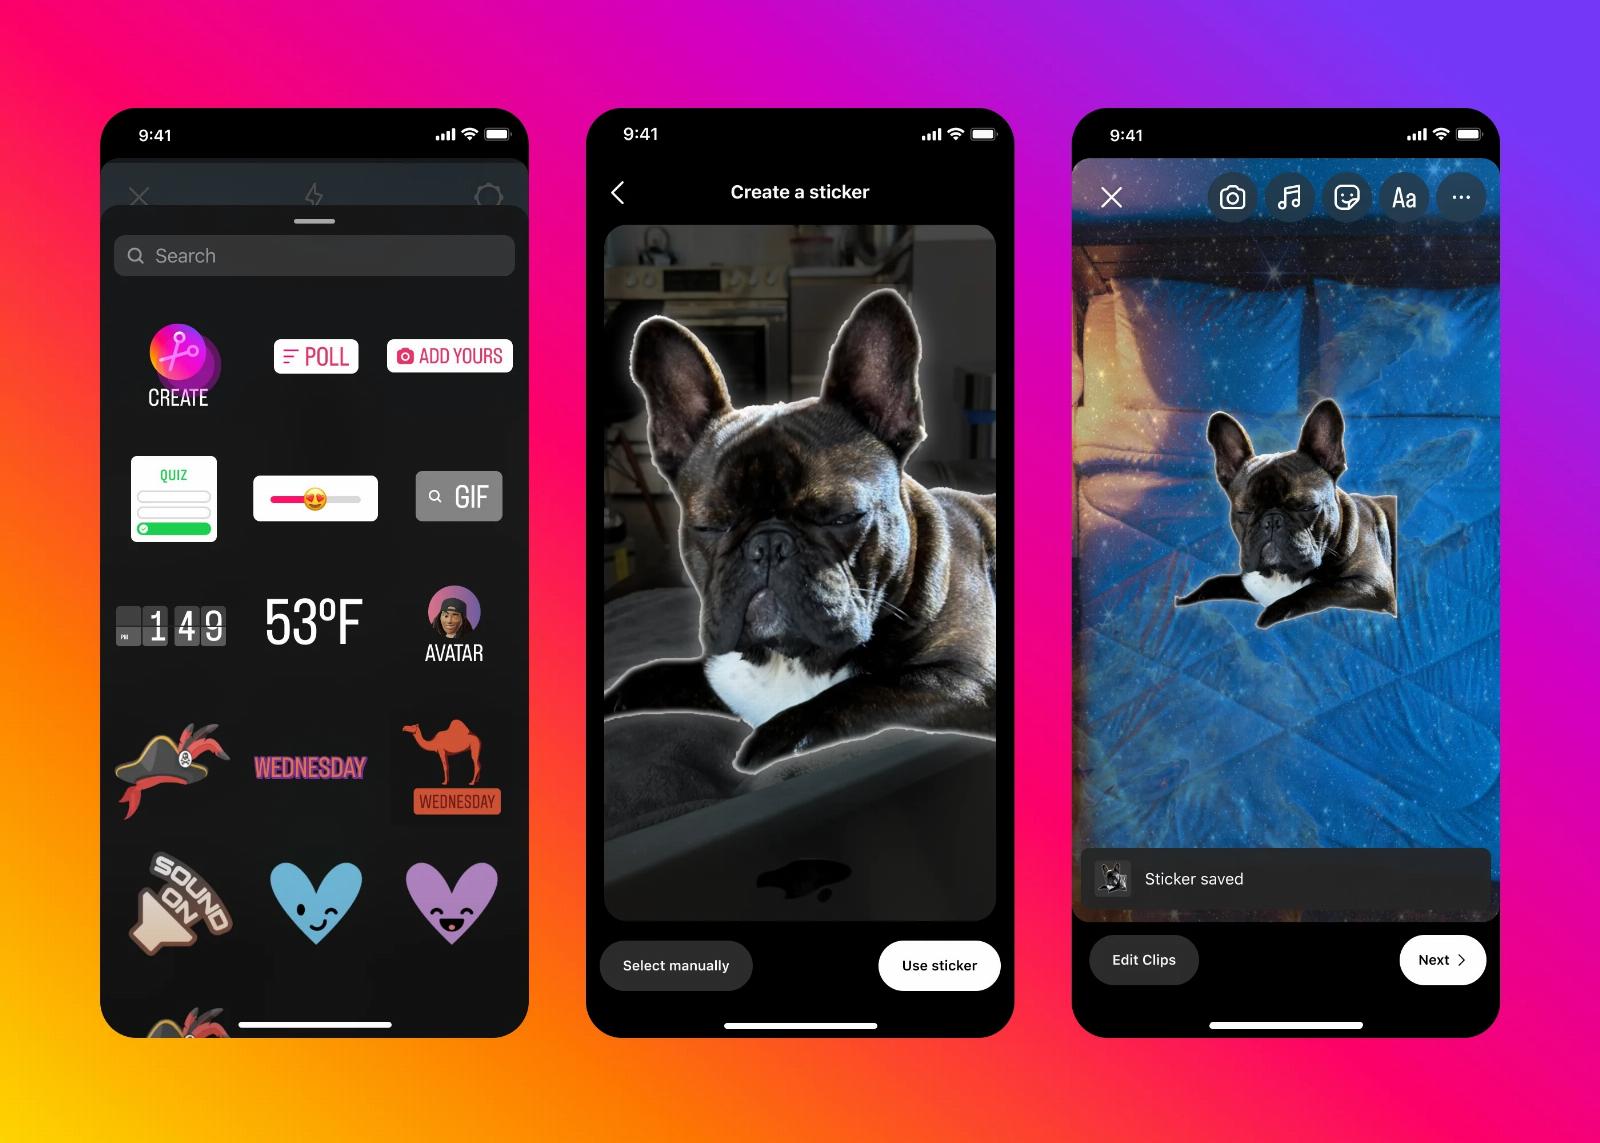 Instagram adds new features, including custom AI stickers, photo filters, a clip hub and more